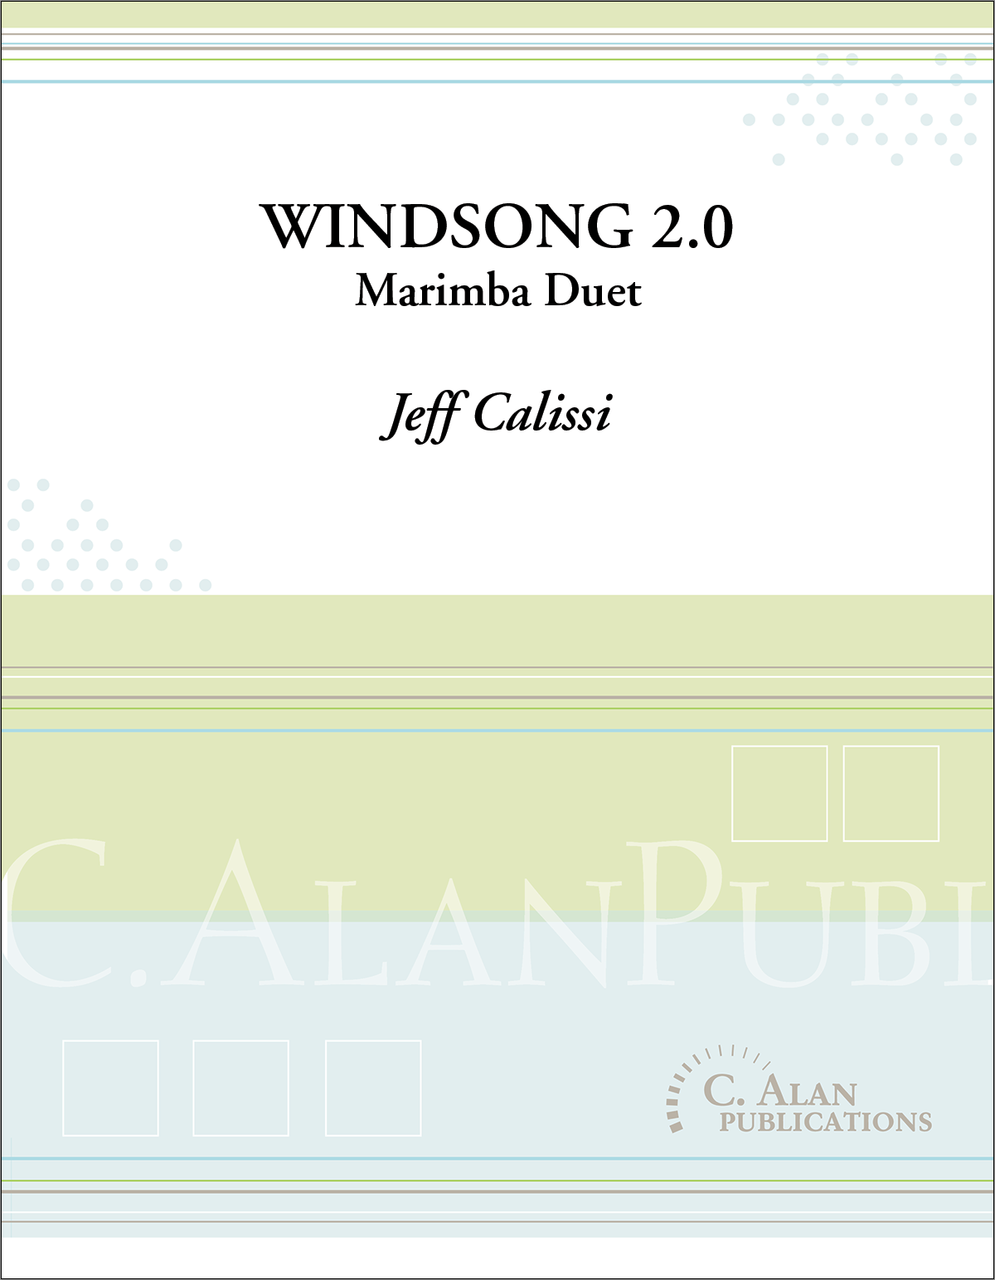 Windsong 2.0 by Jeff Calissi